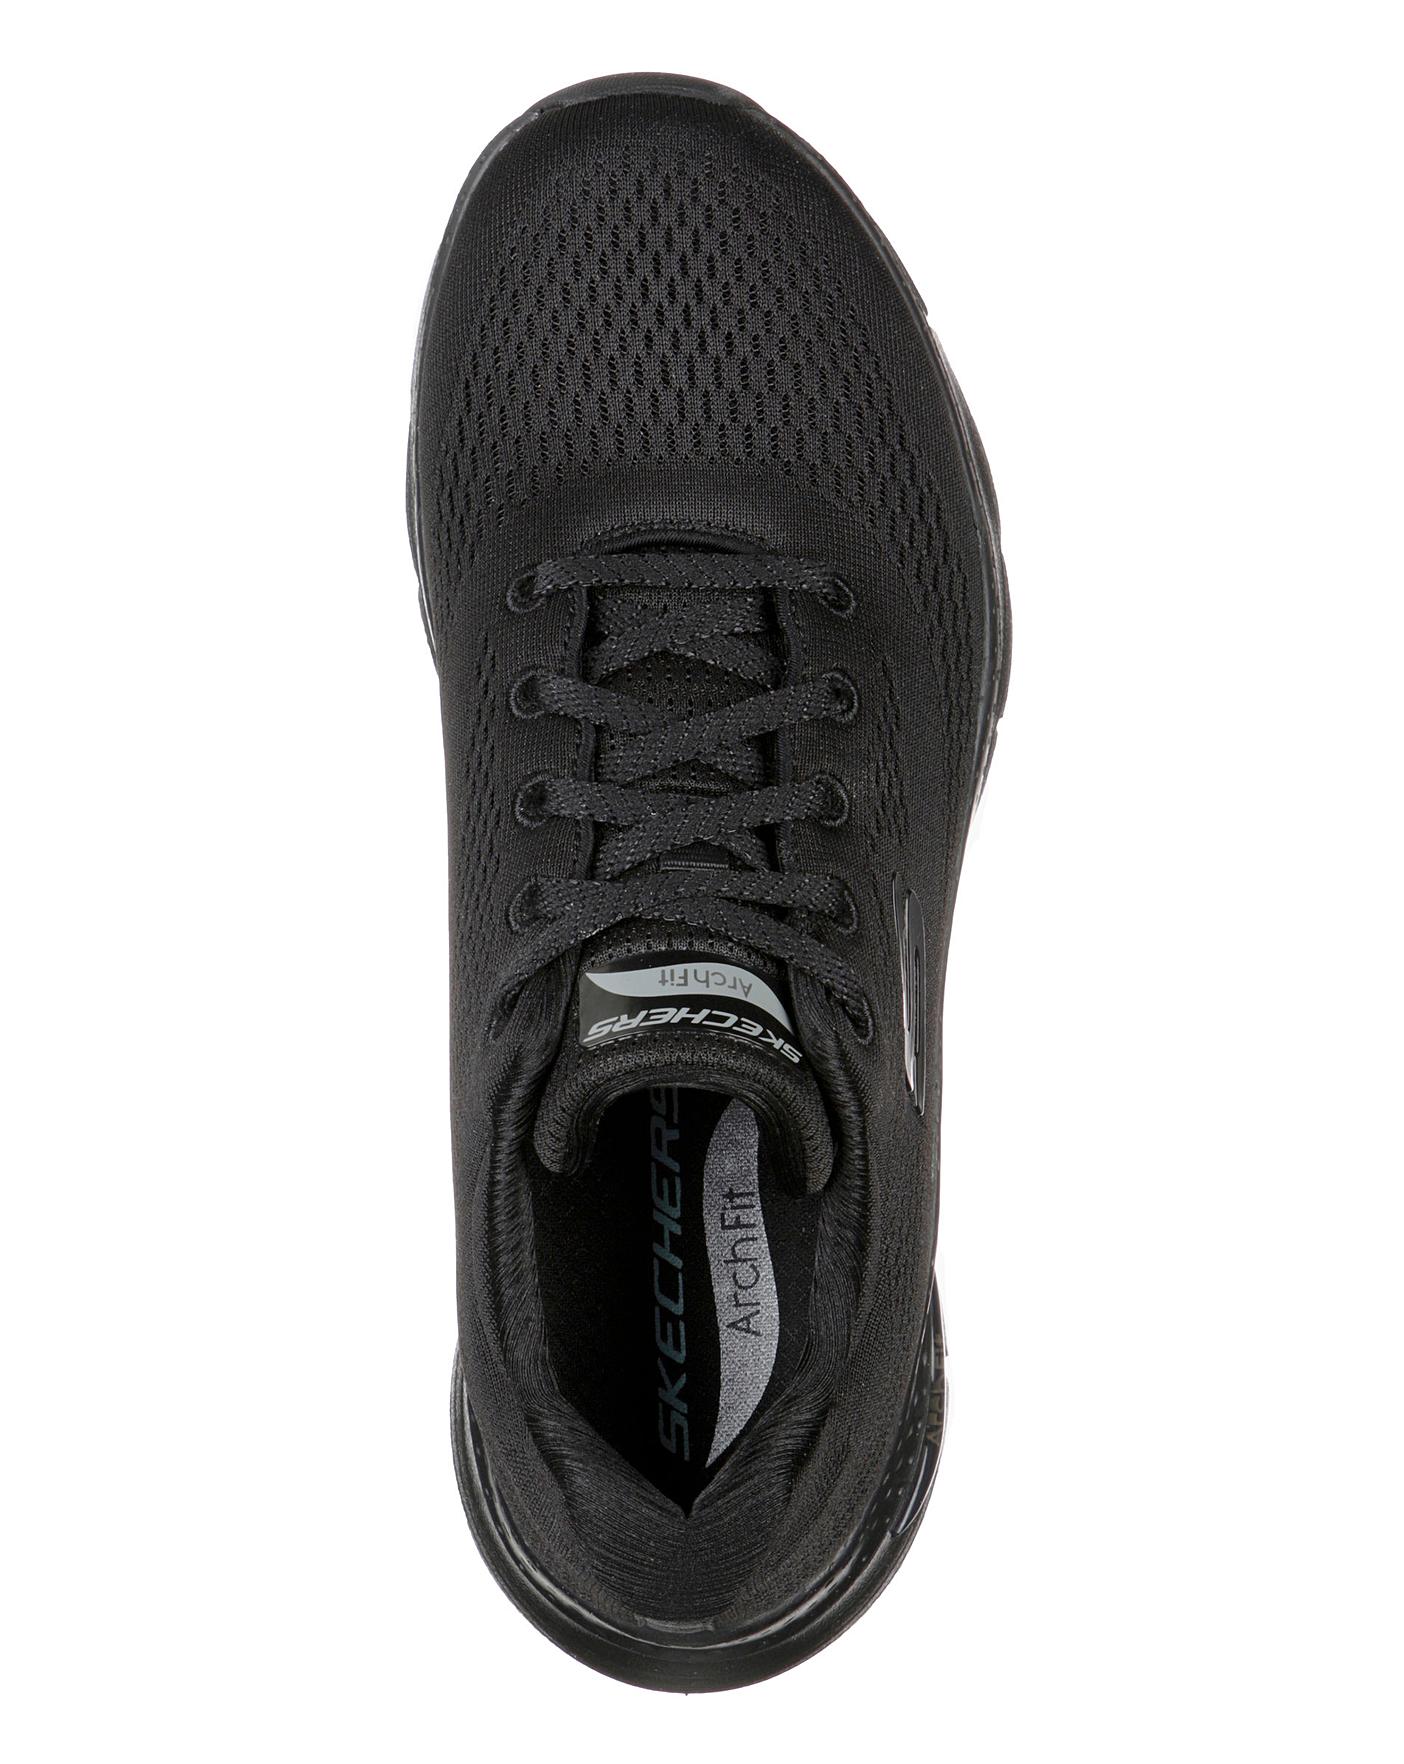 Skechers Arch Fit Big Appeal Trainers | J D Williams